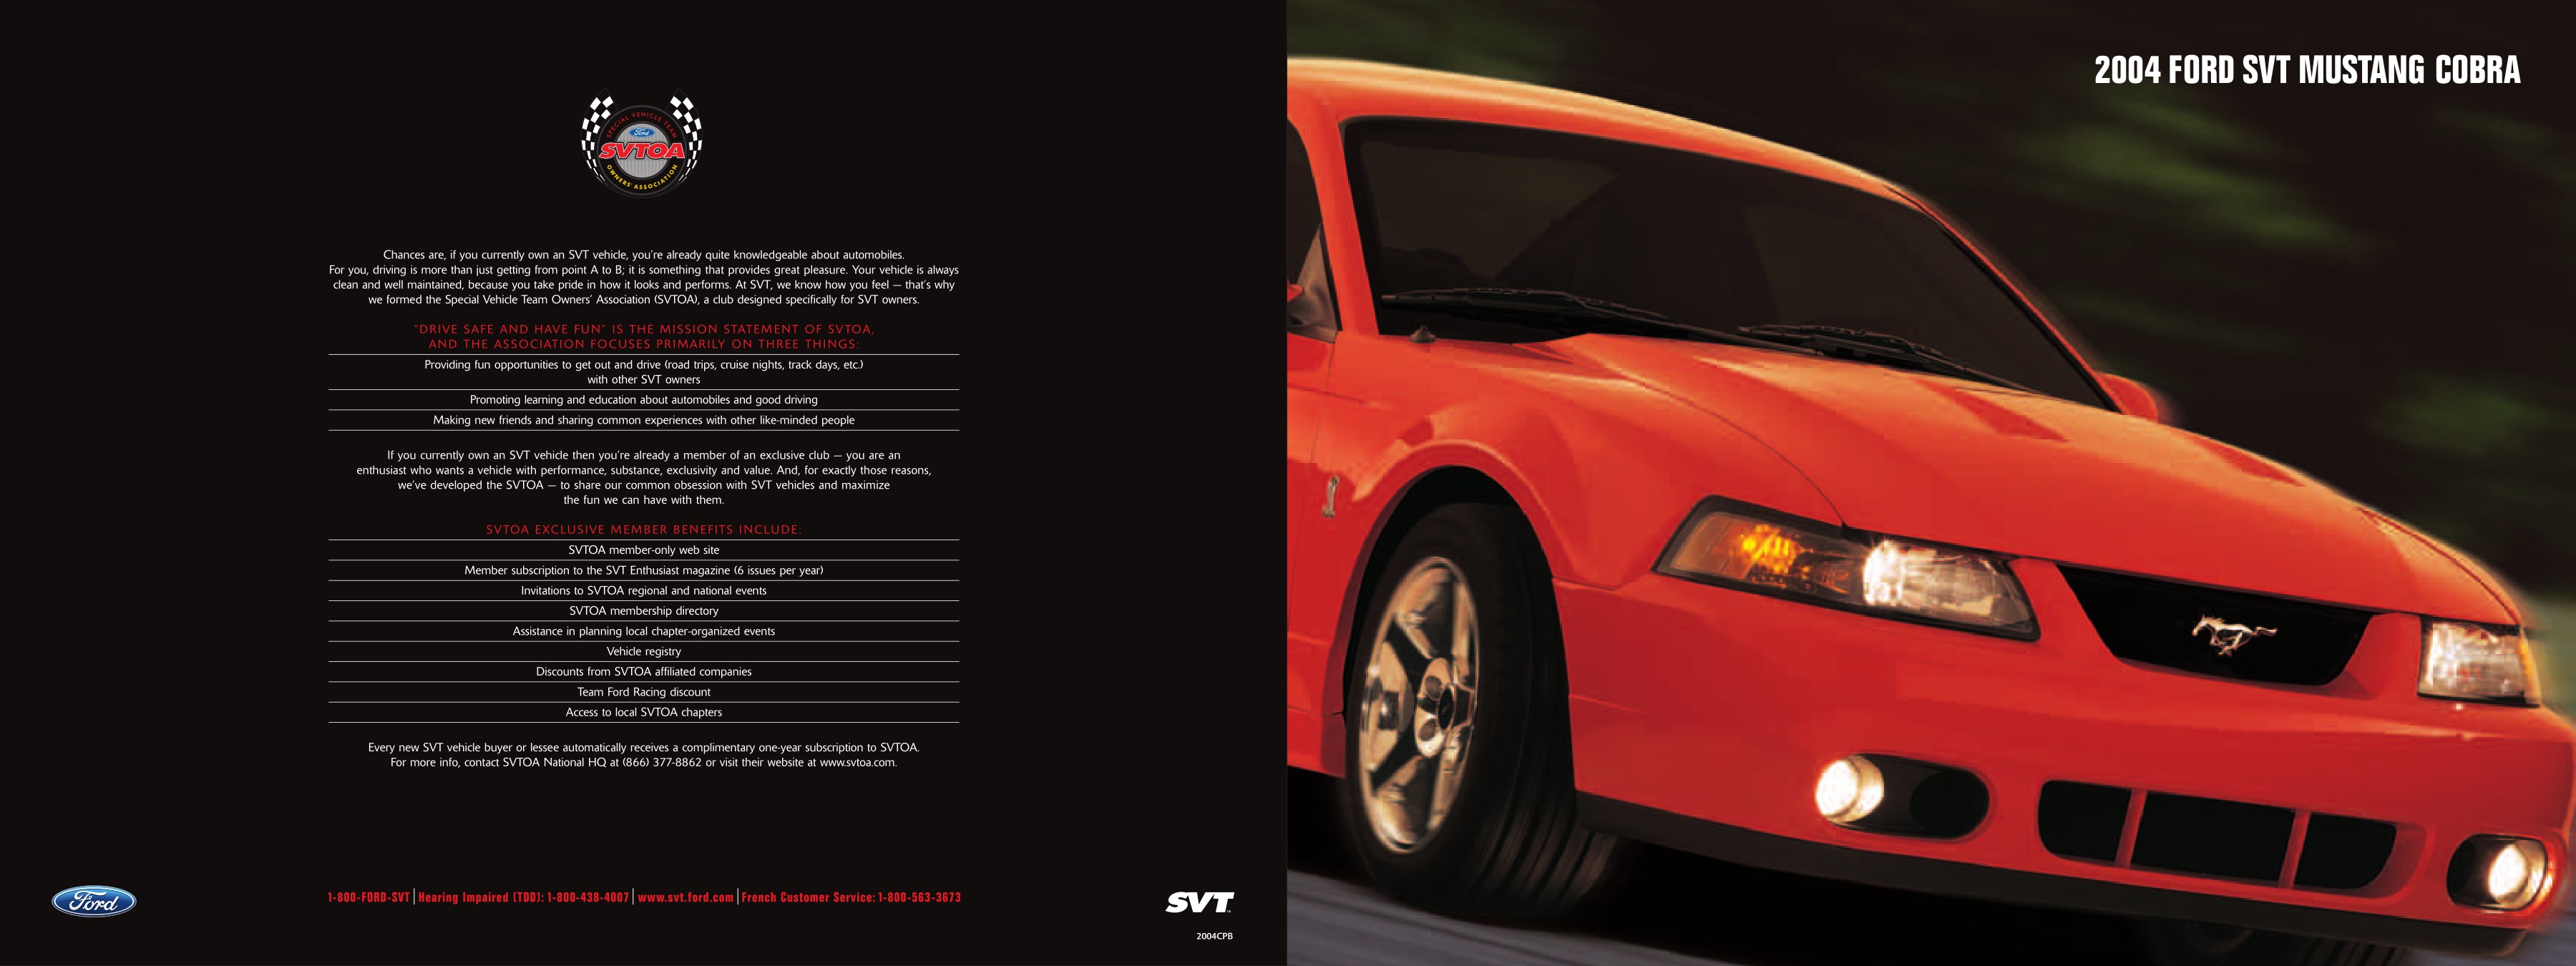 2004 Ford Mustang Cobra Brochure Page 2